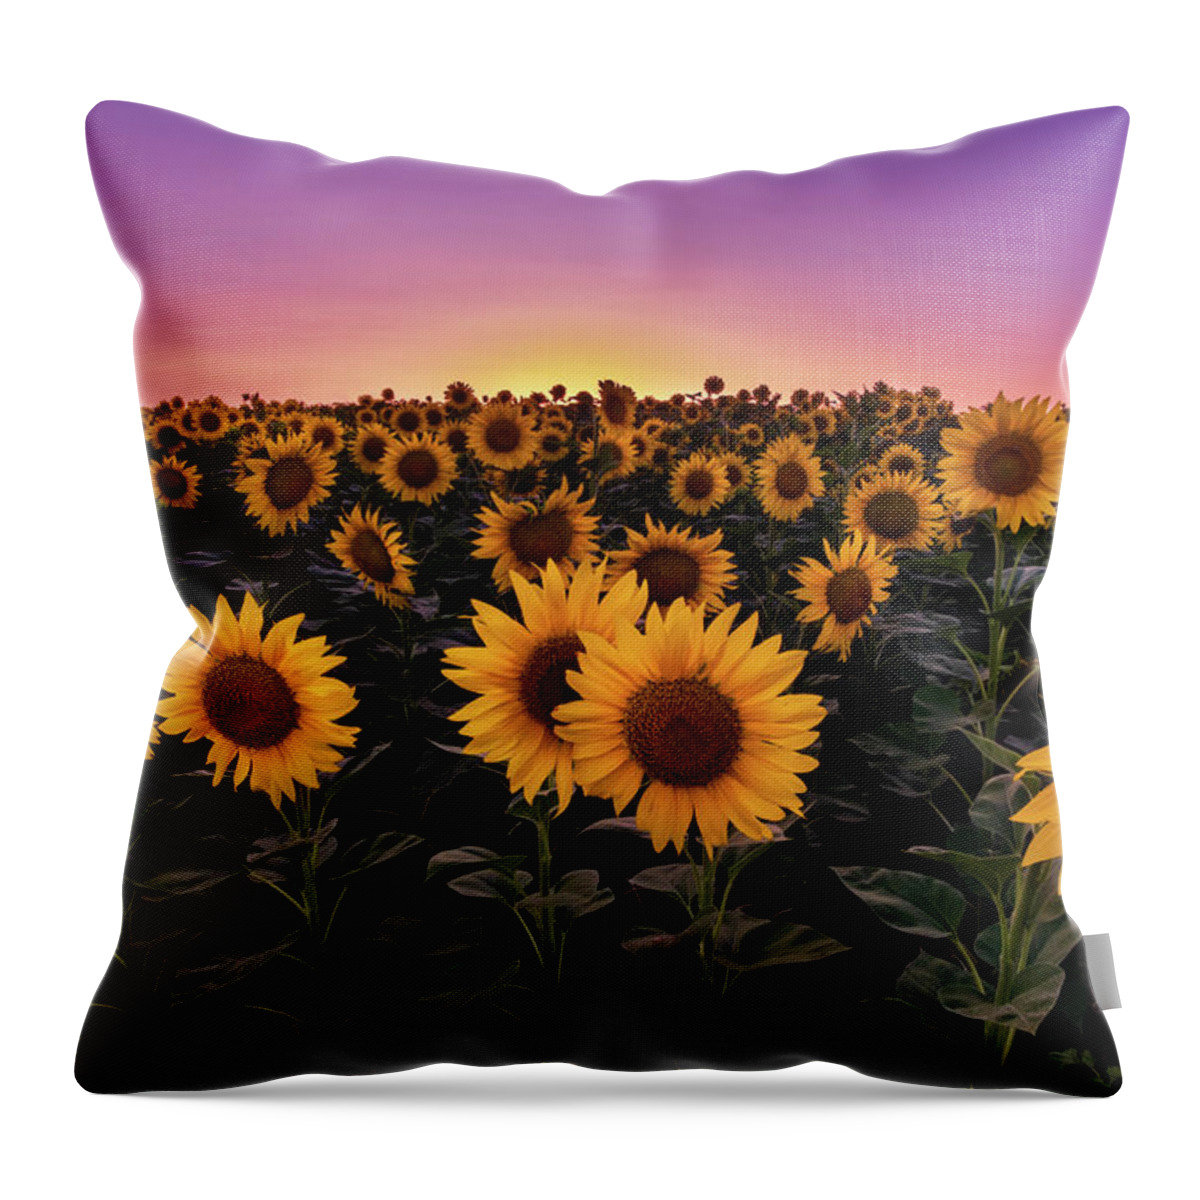 Sunflowers Throw Pillow featuring the photograph Sunflowers by Alexios Ntounas